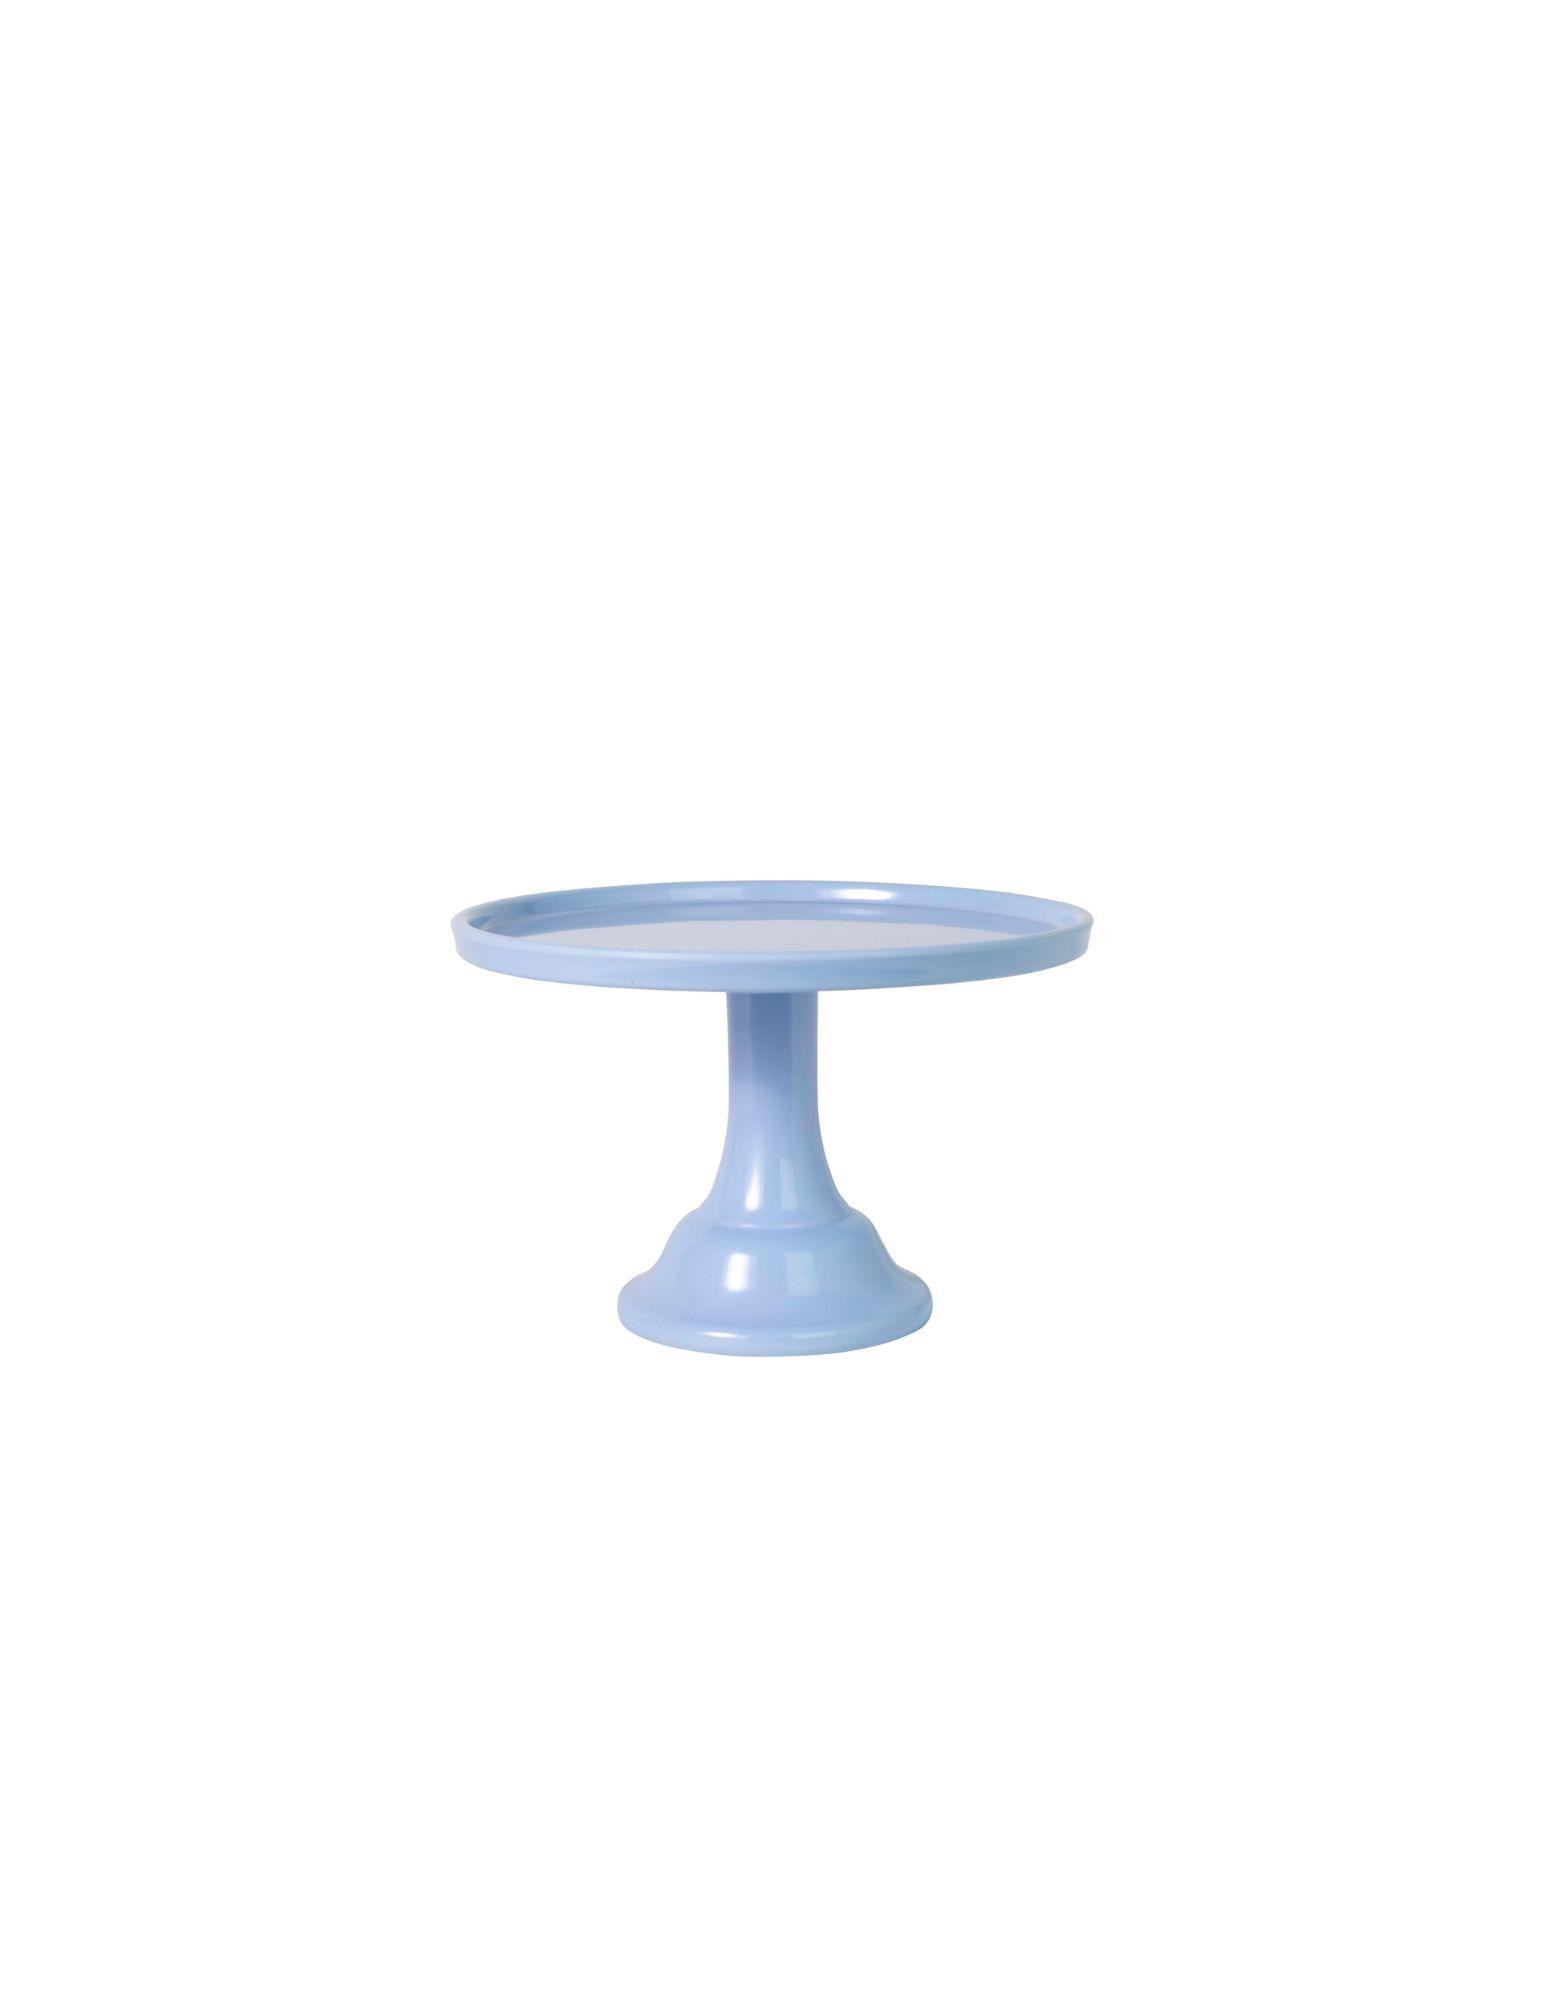 Melamine Cake Stand Small- Wedgewood Blue 8.5 inch